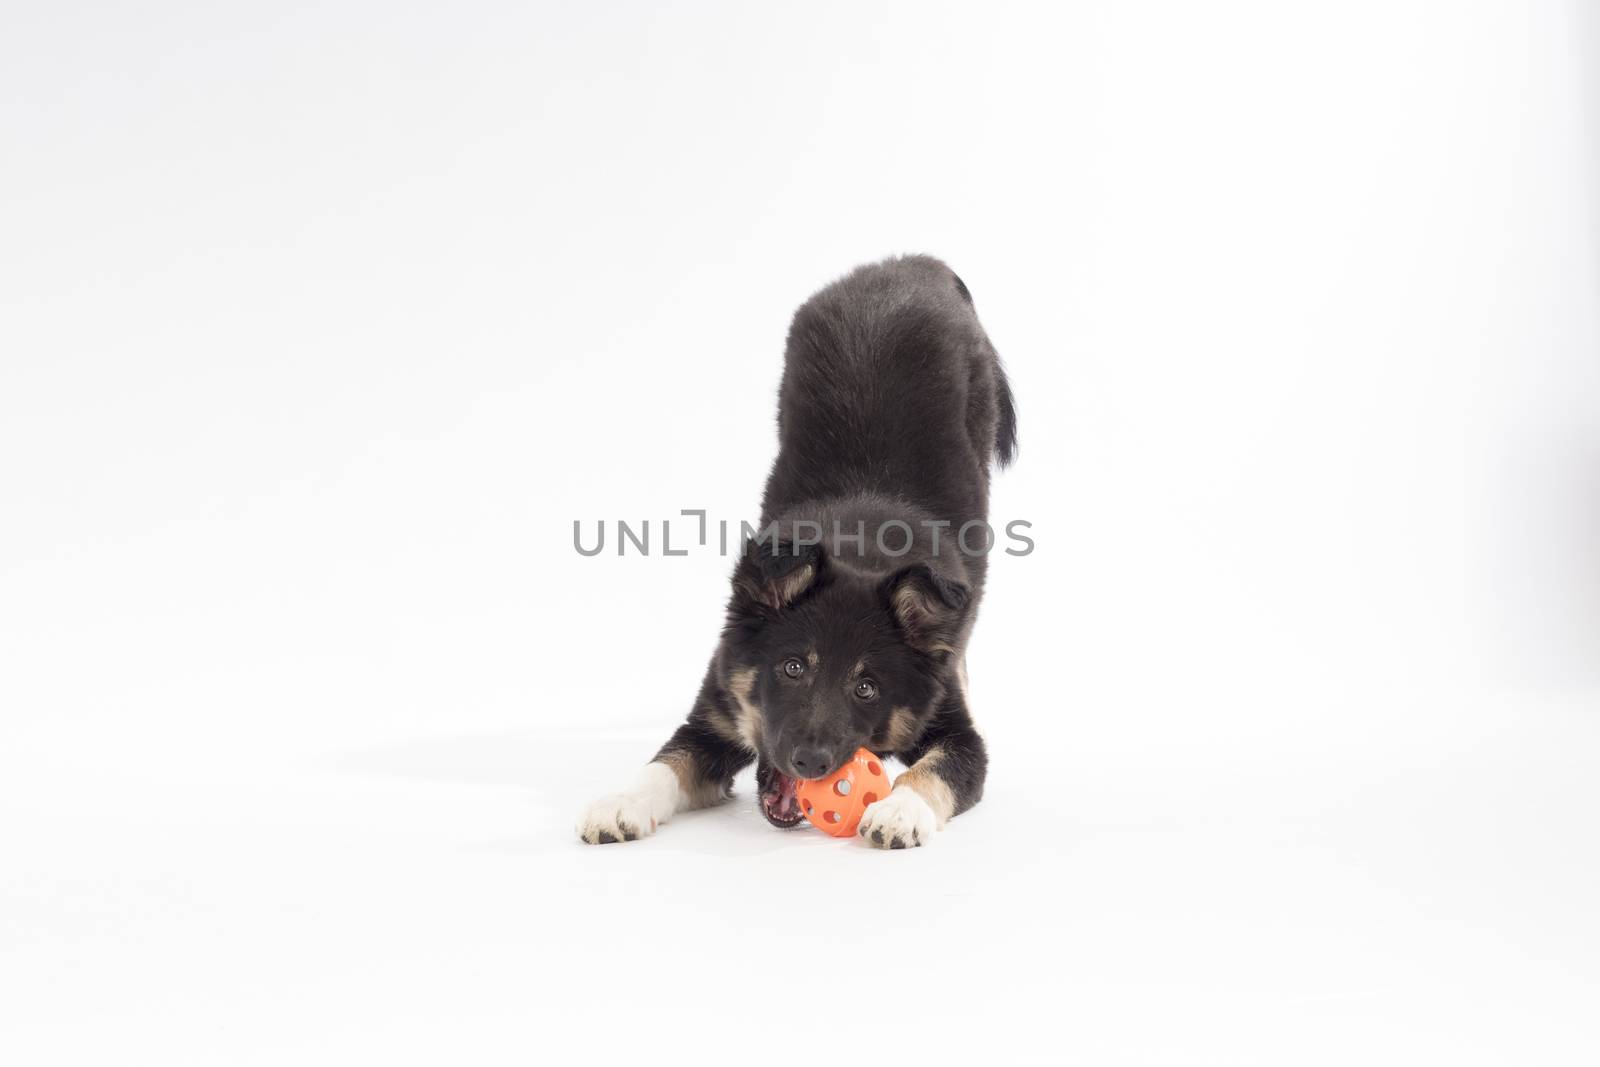 Puppy dog, Border Collie, playing with ball, white background by avanheertum